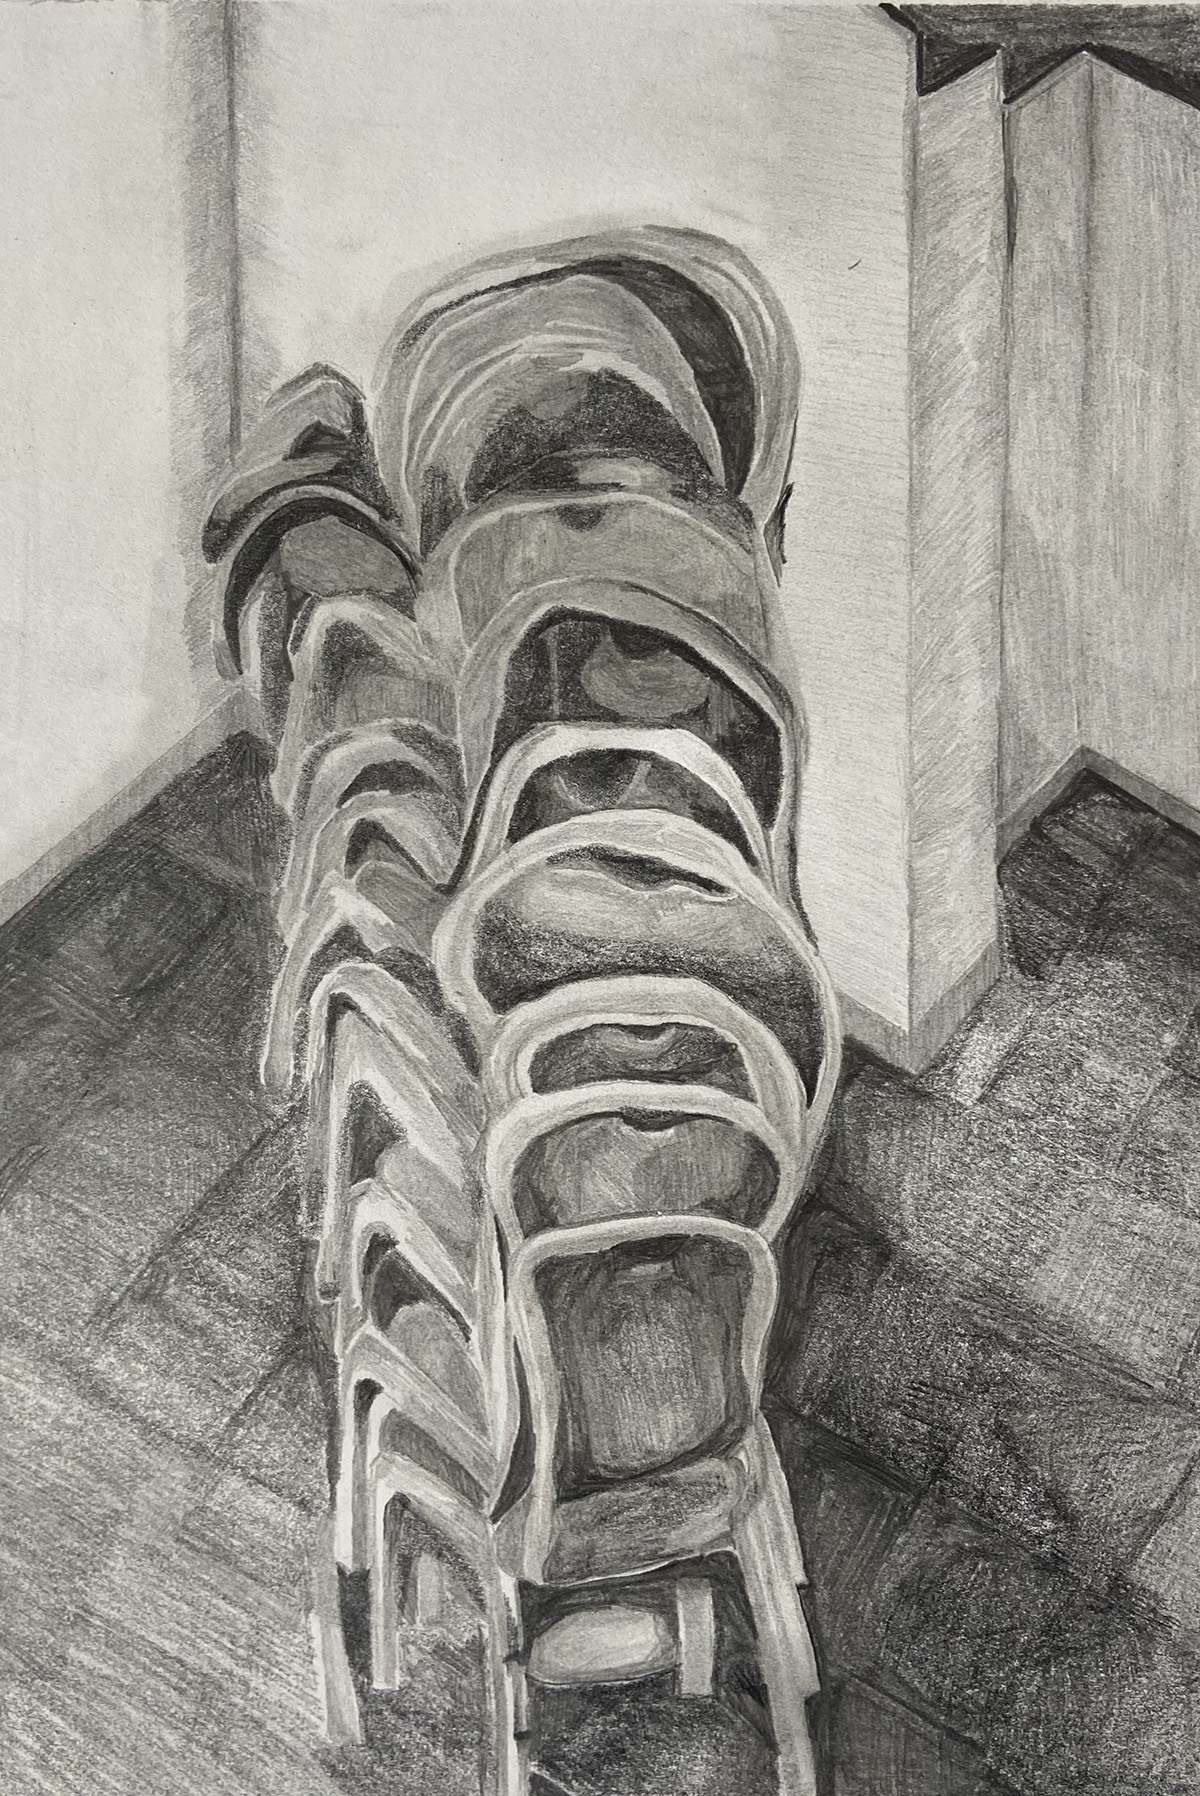 A pencil drawing of a stack of chairs.